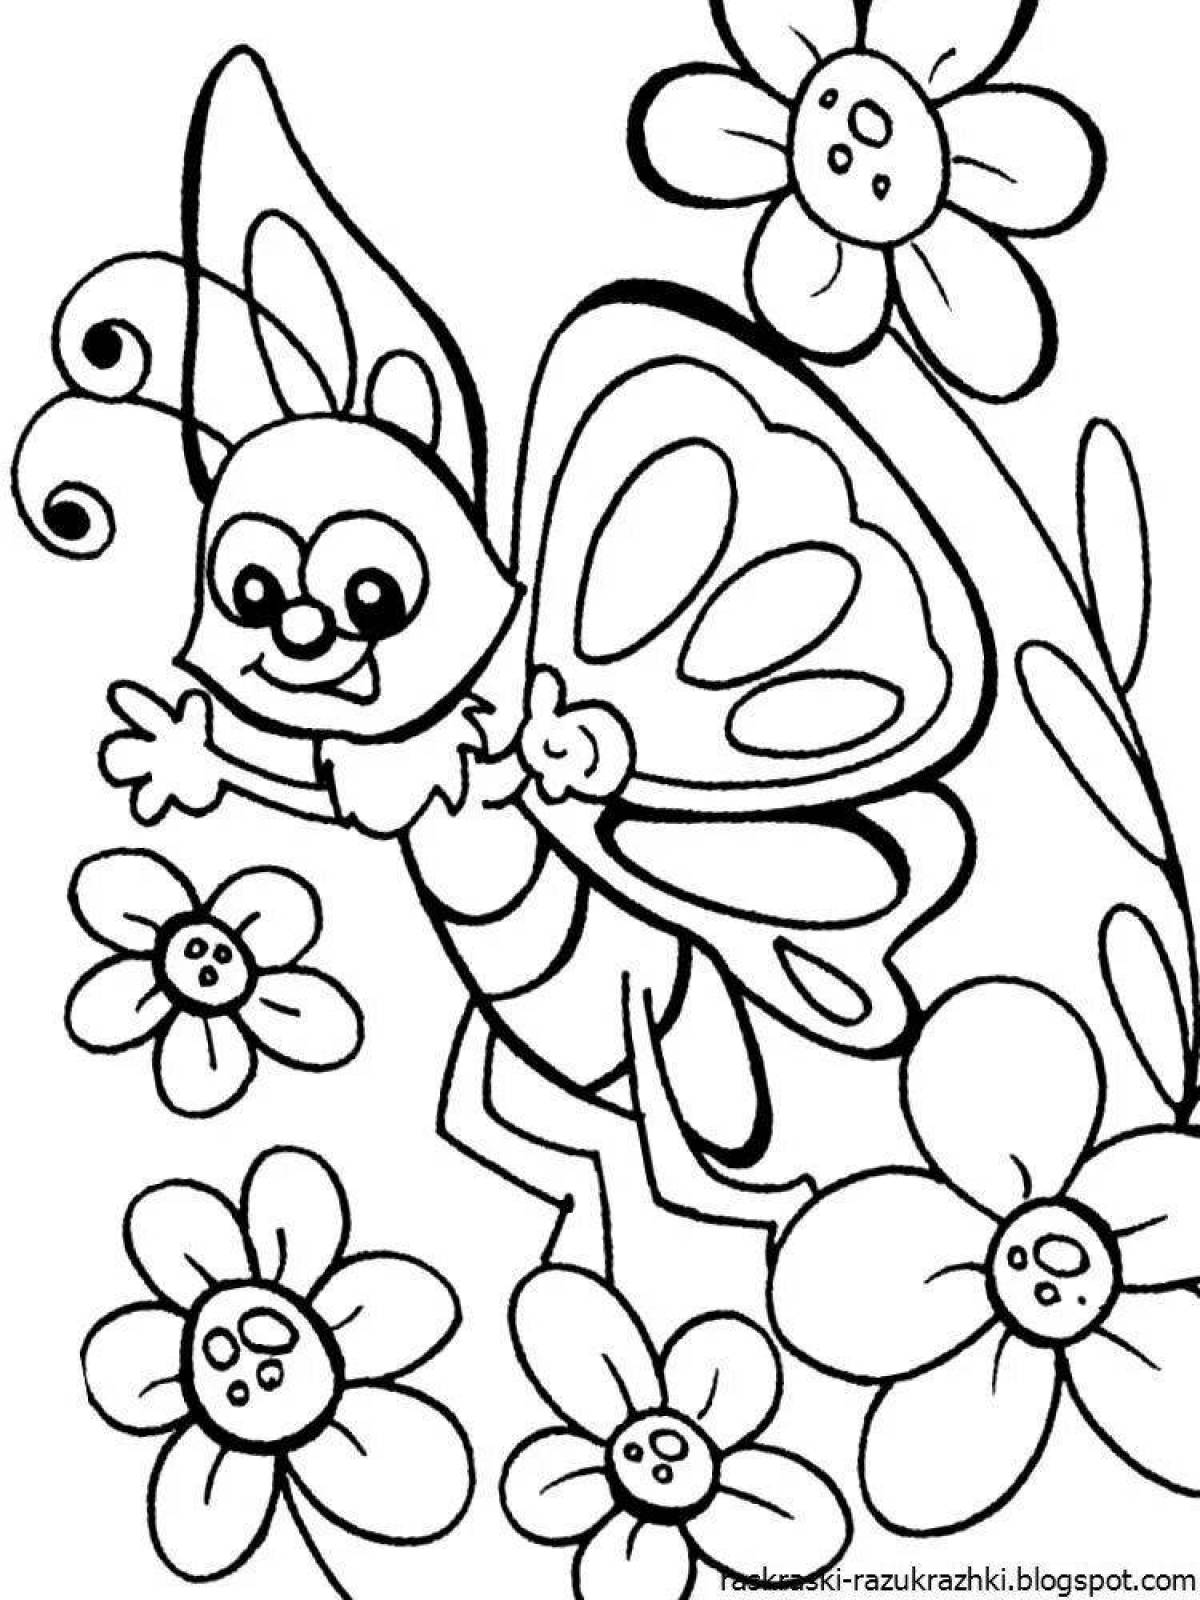 Playful butterfly coloring book for 5-6 year olds